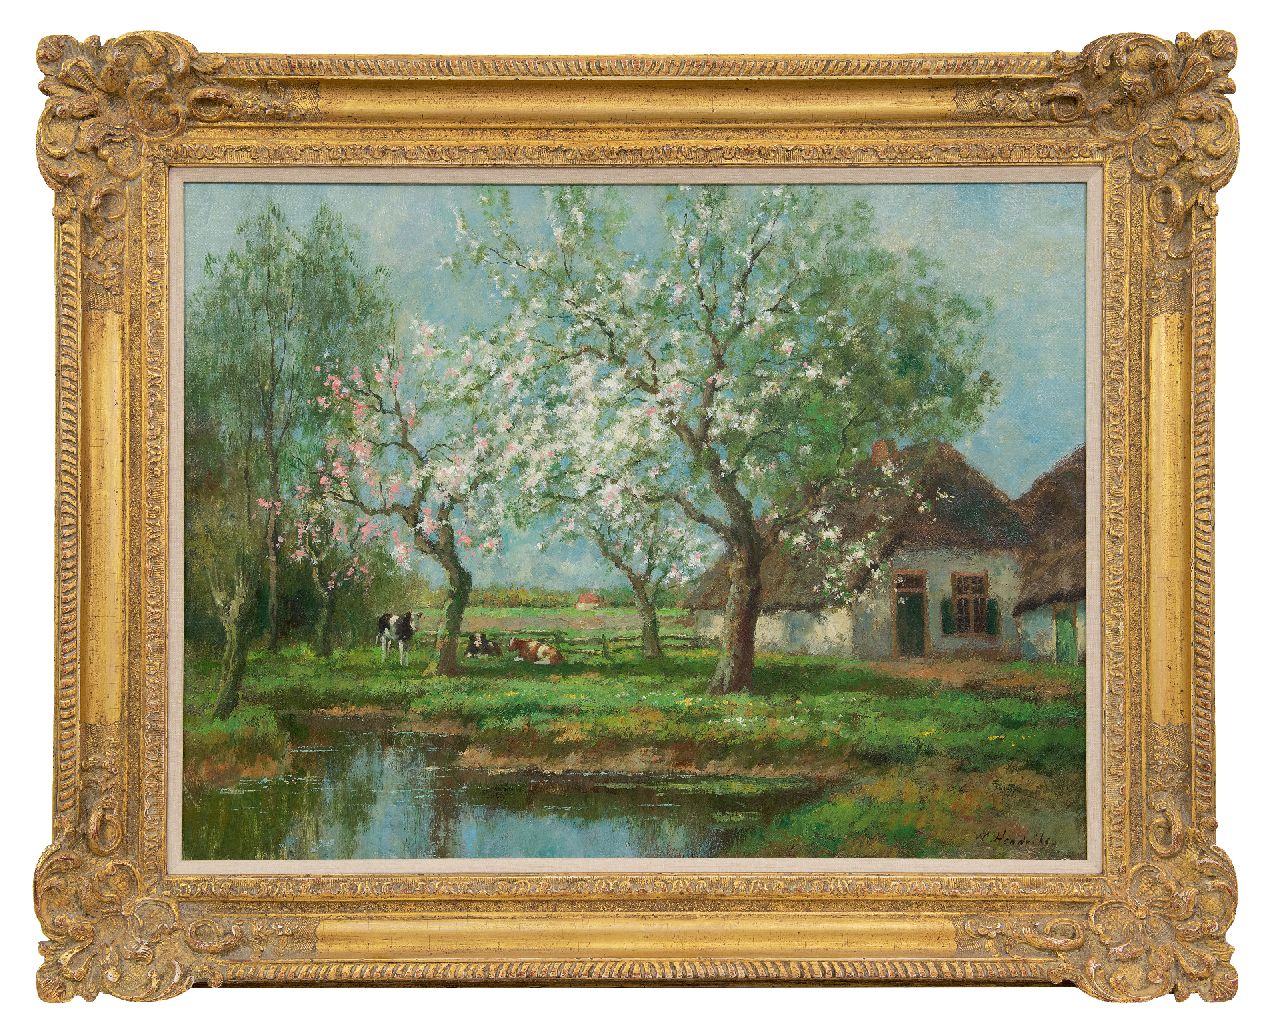 Bouter C.W.  | Cornelis Wouter 'Cor' Bouter, Farmyard in spring, Öl auf Leinwand 61,0 x 81,6 cm, signed l.r. 'W. Hendriks' (pseudonym)